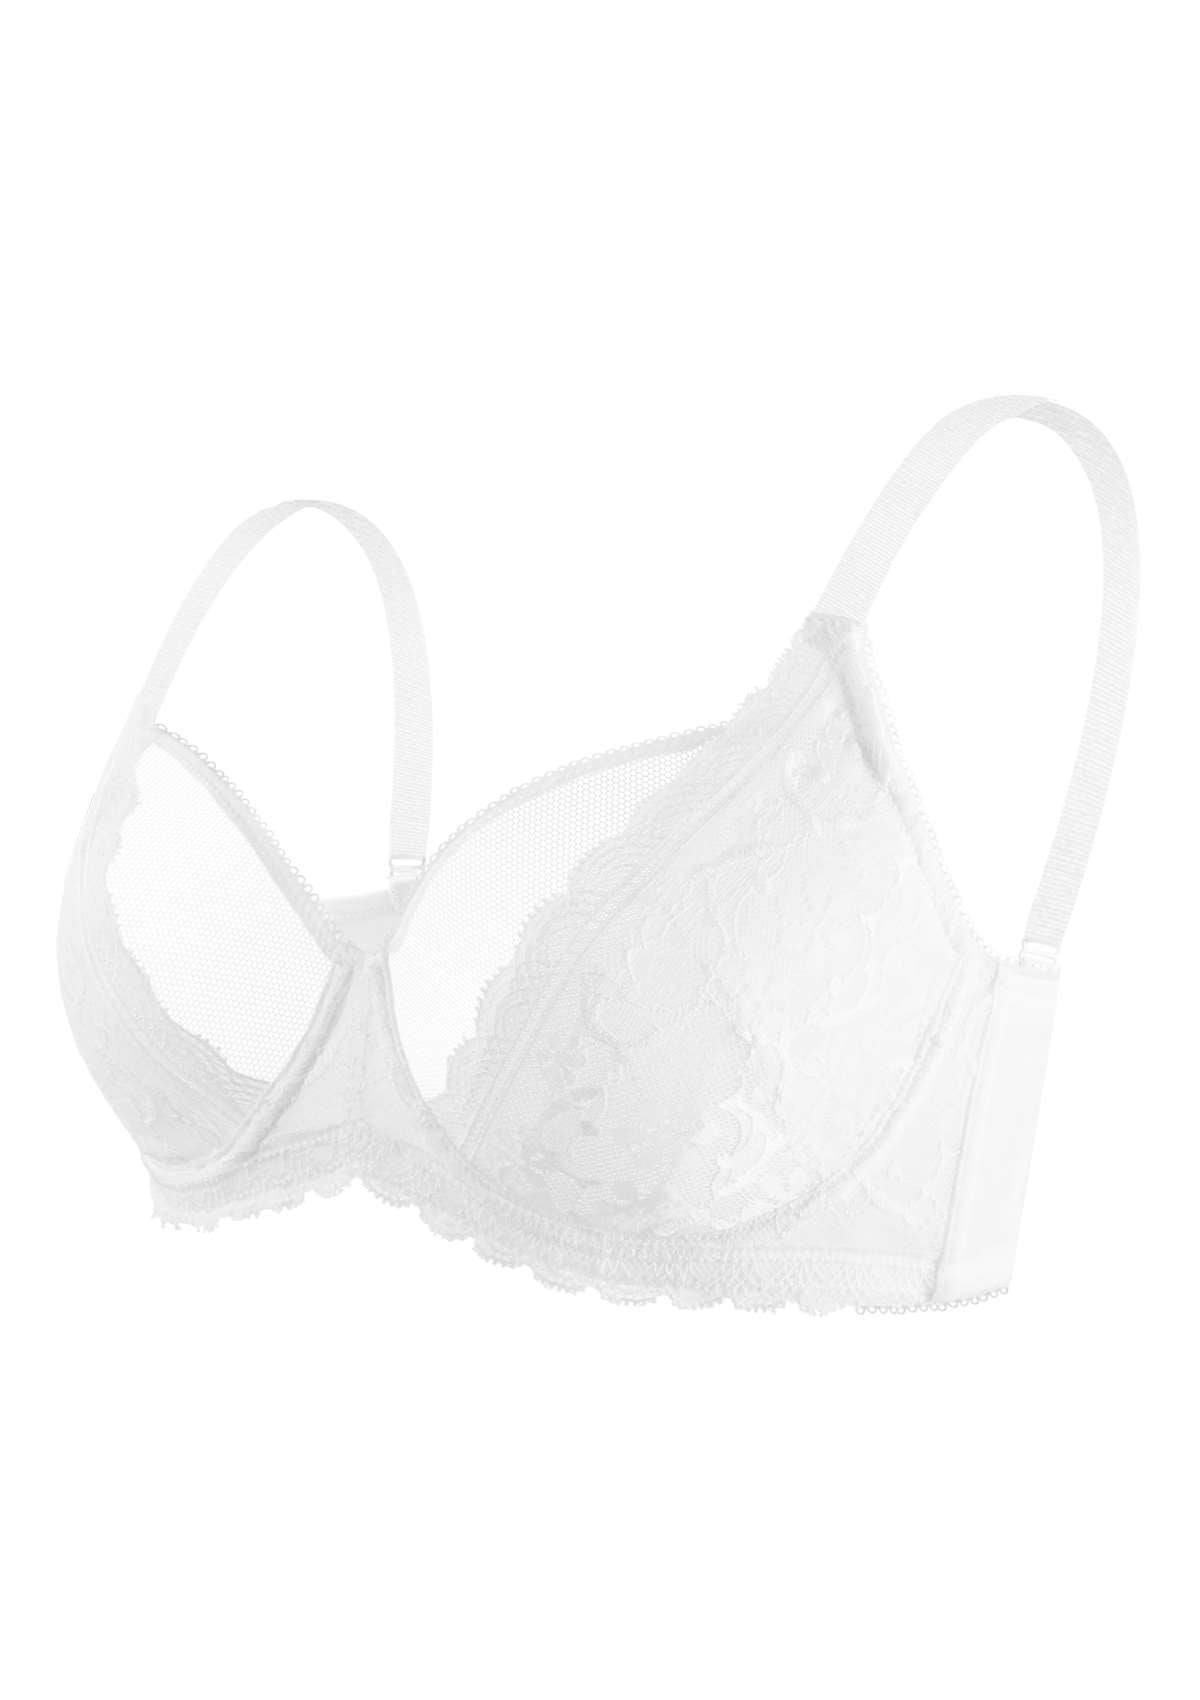 HSIA Anemone Big Bra: Best Bra For Lift And Support, Floral Bra - Burgundy / 42 / DD/E